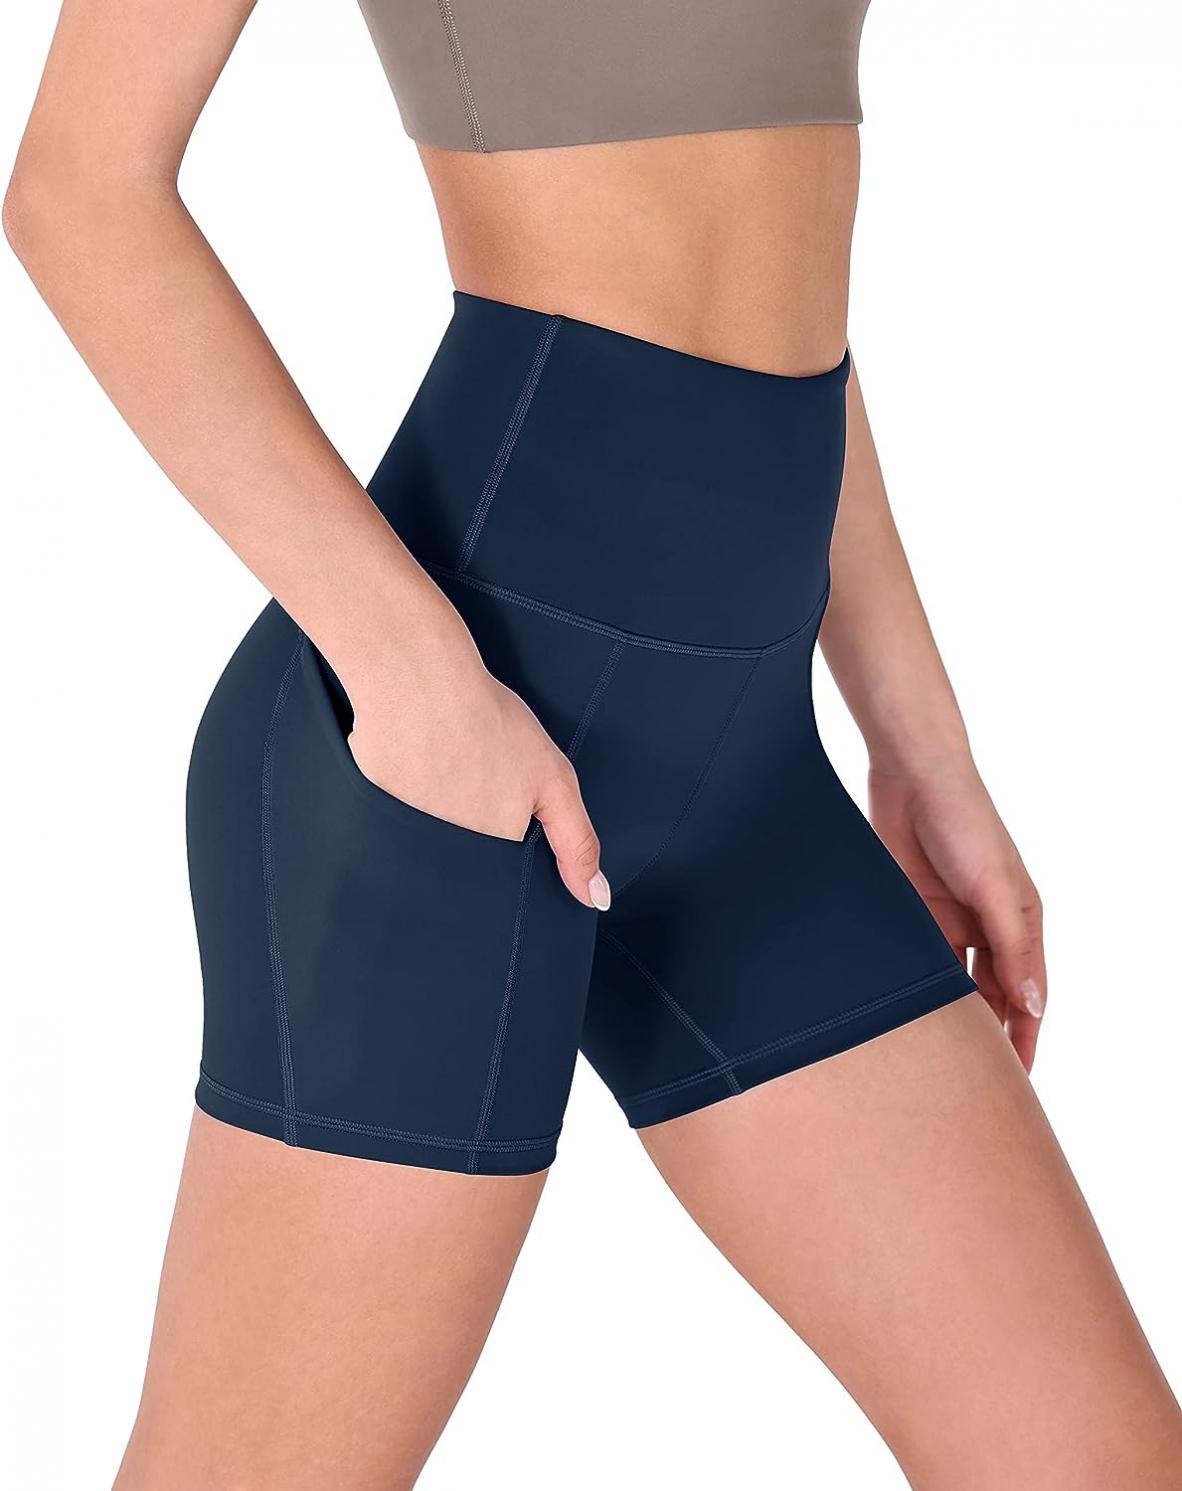 ODODOS Women's Tummy Control Yoga Shorts 2.0 with Pockets High Waist Athletic Workout Shorts-5" / 8" Inseam